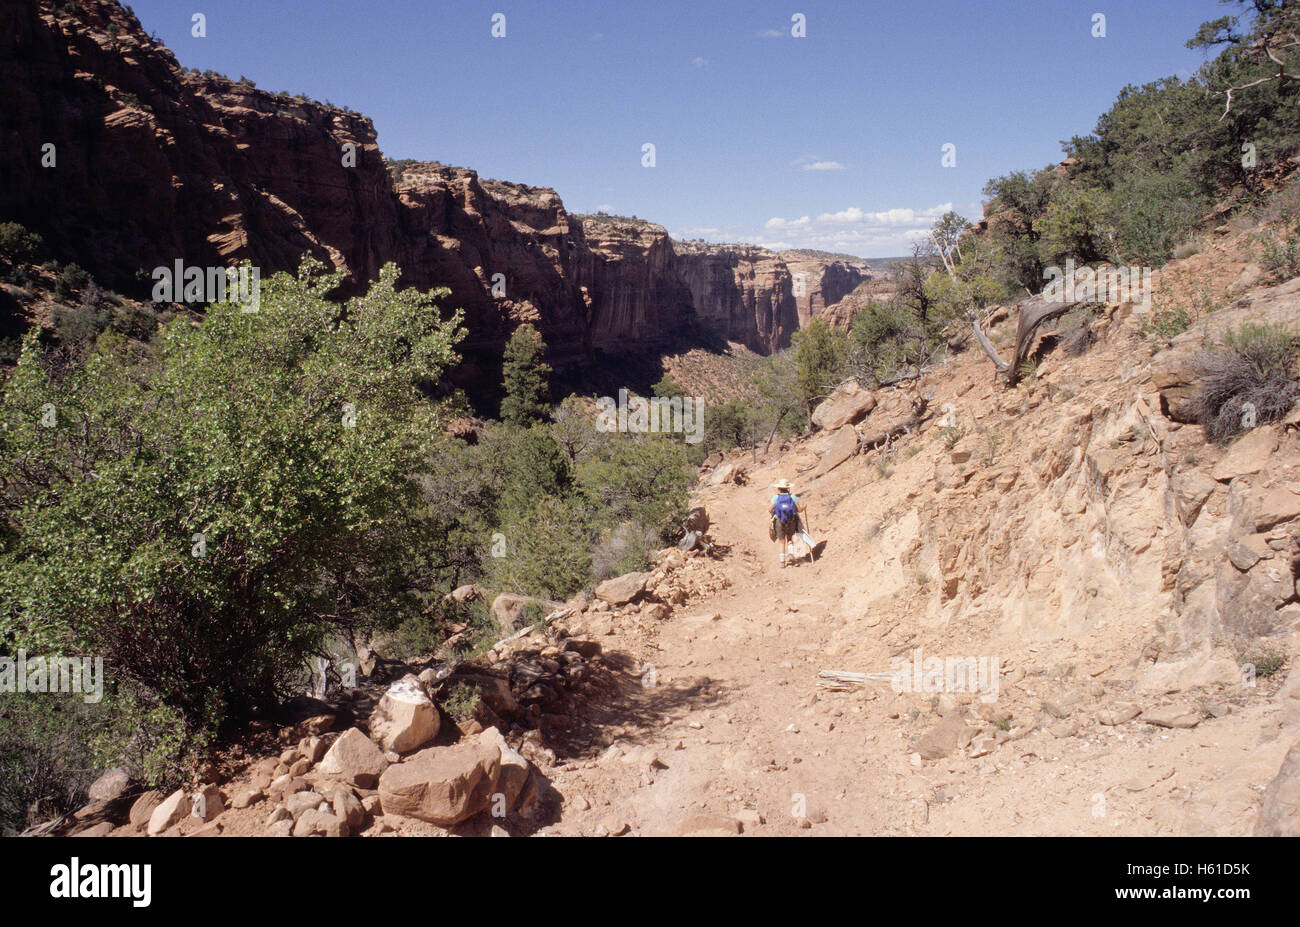 Female hiker on trail descending into Canyon de Chelly National Monument, Arizona Stock Photo